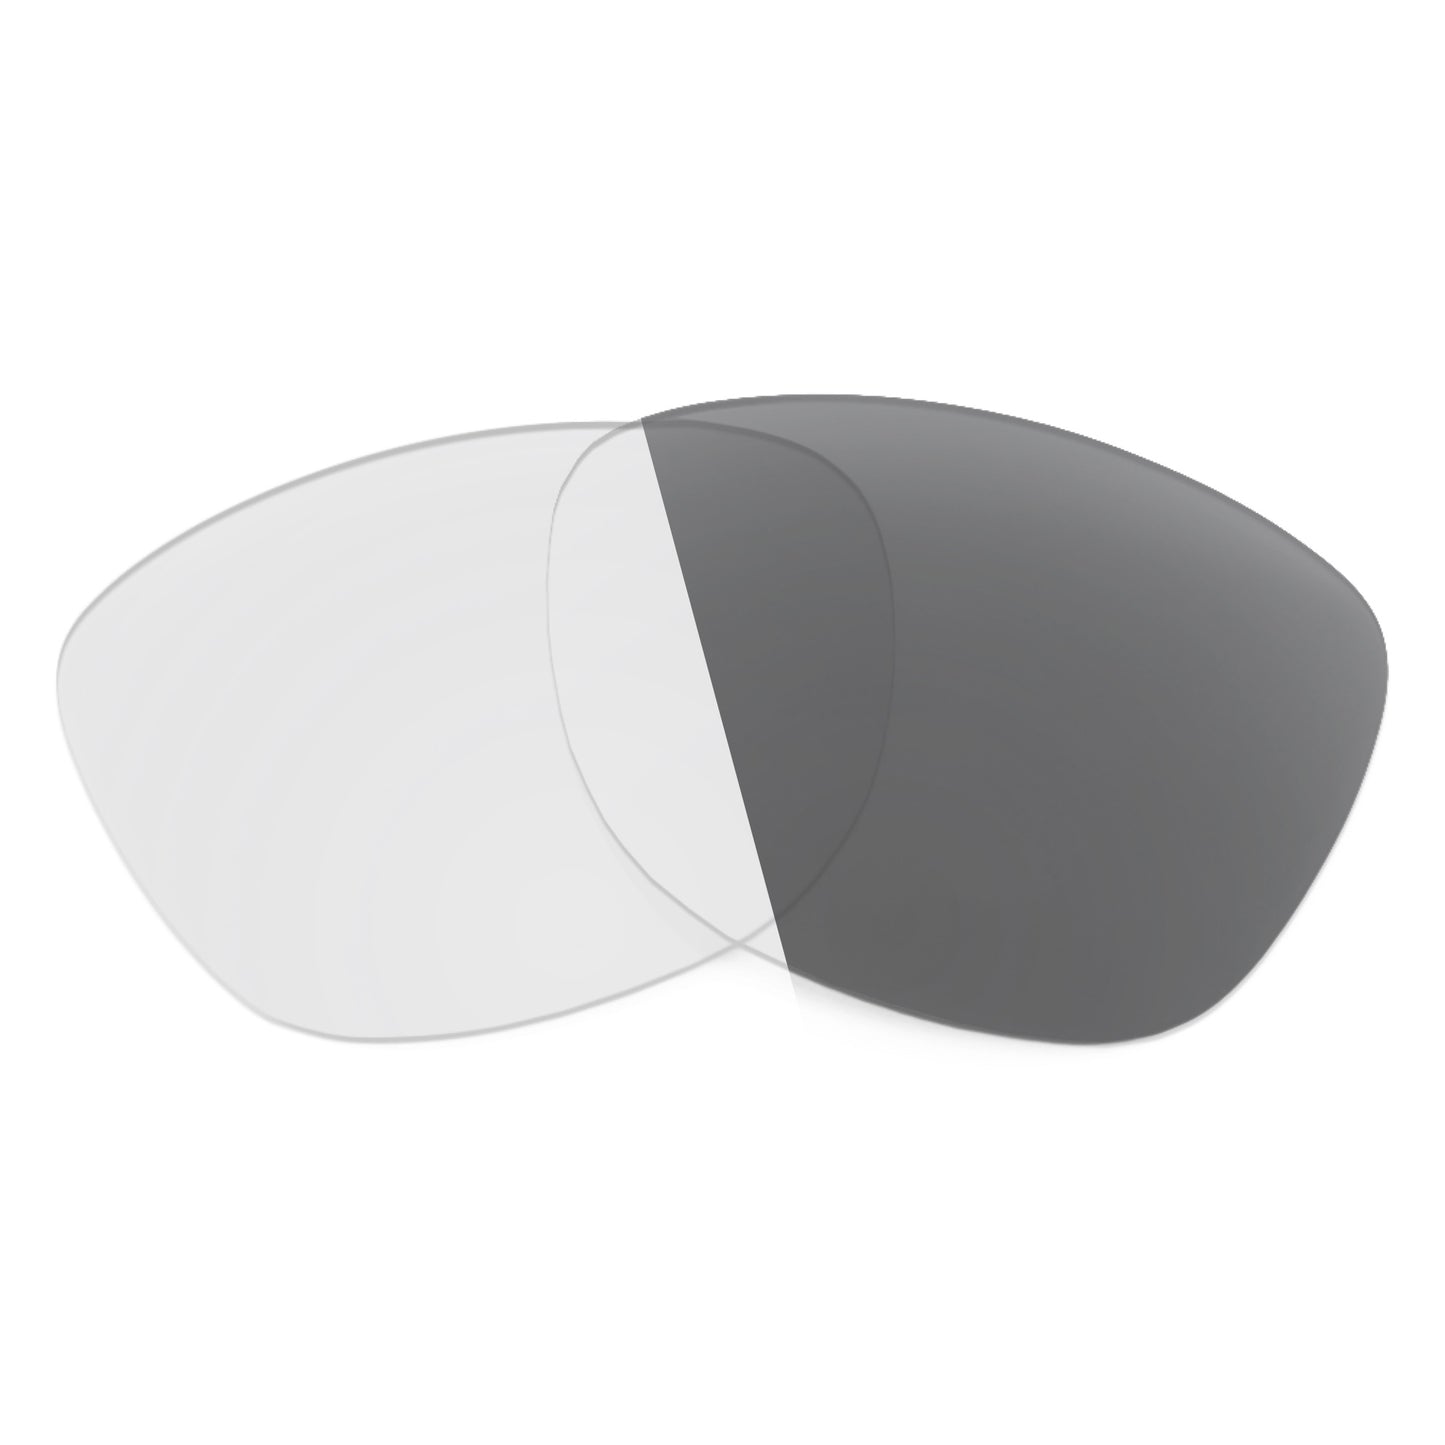 Revant replacement lenses for Ray-Ban RB4227 55mm Non-Polarized Adapt Gray Photochromic